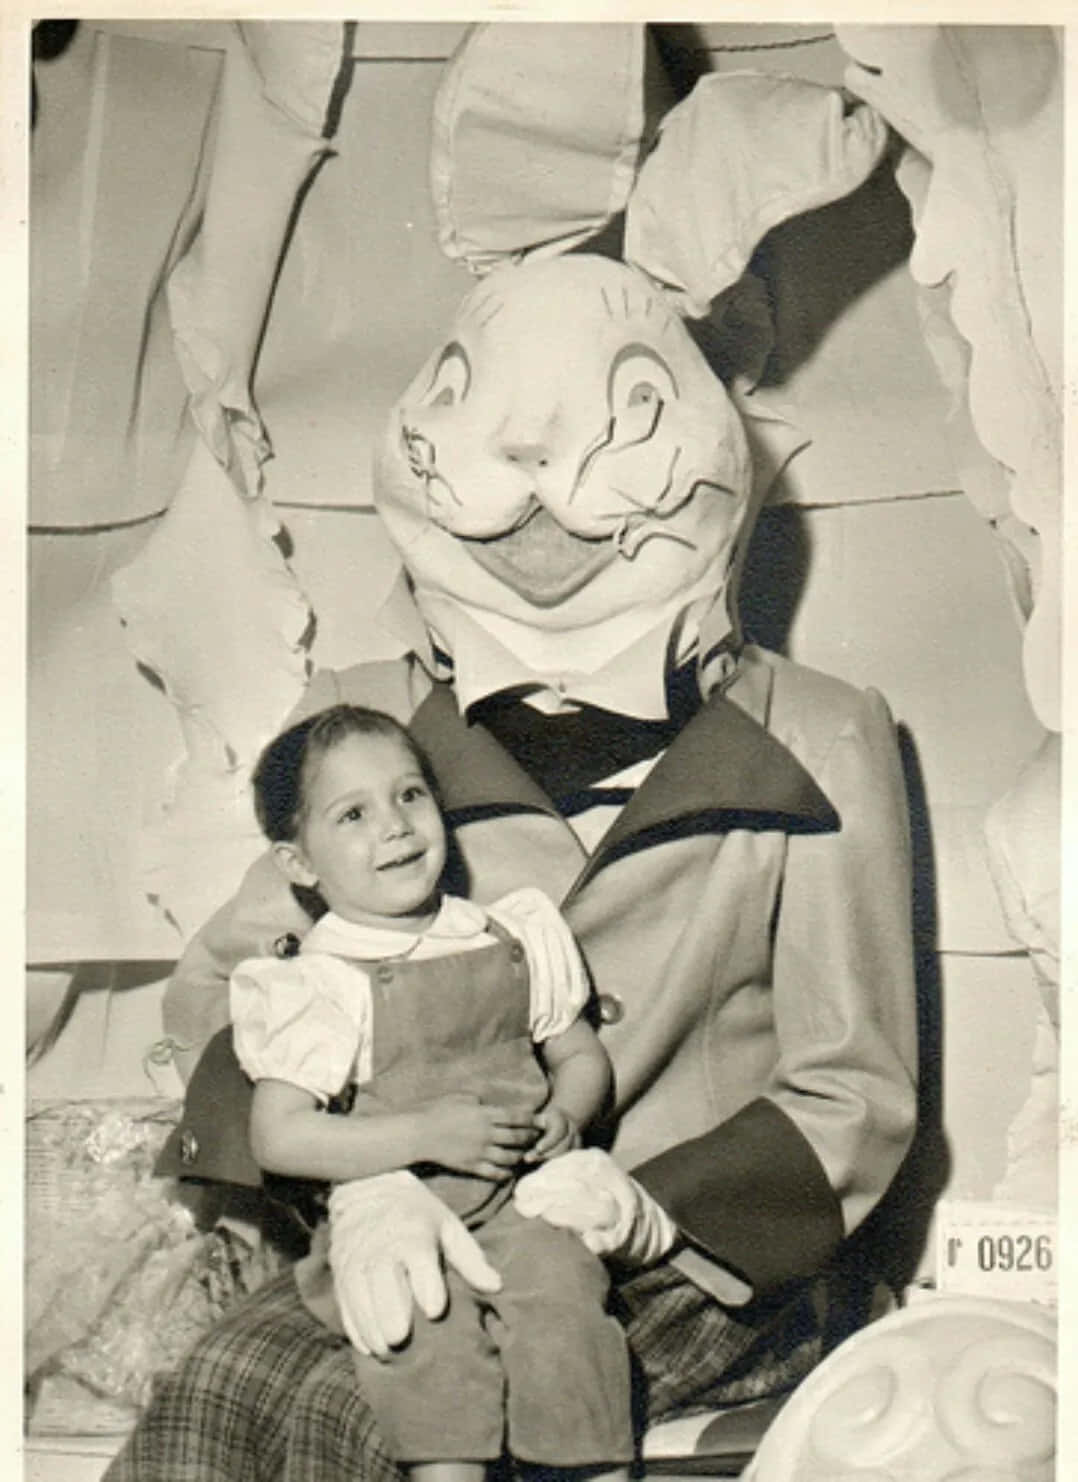 "The Creepy Easter Bunny distracts from the holiday's usual joy"